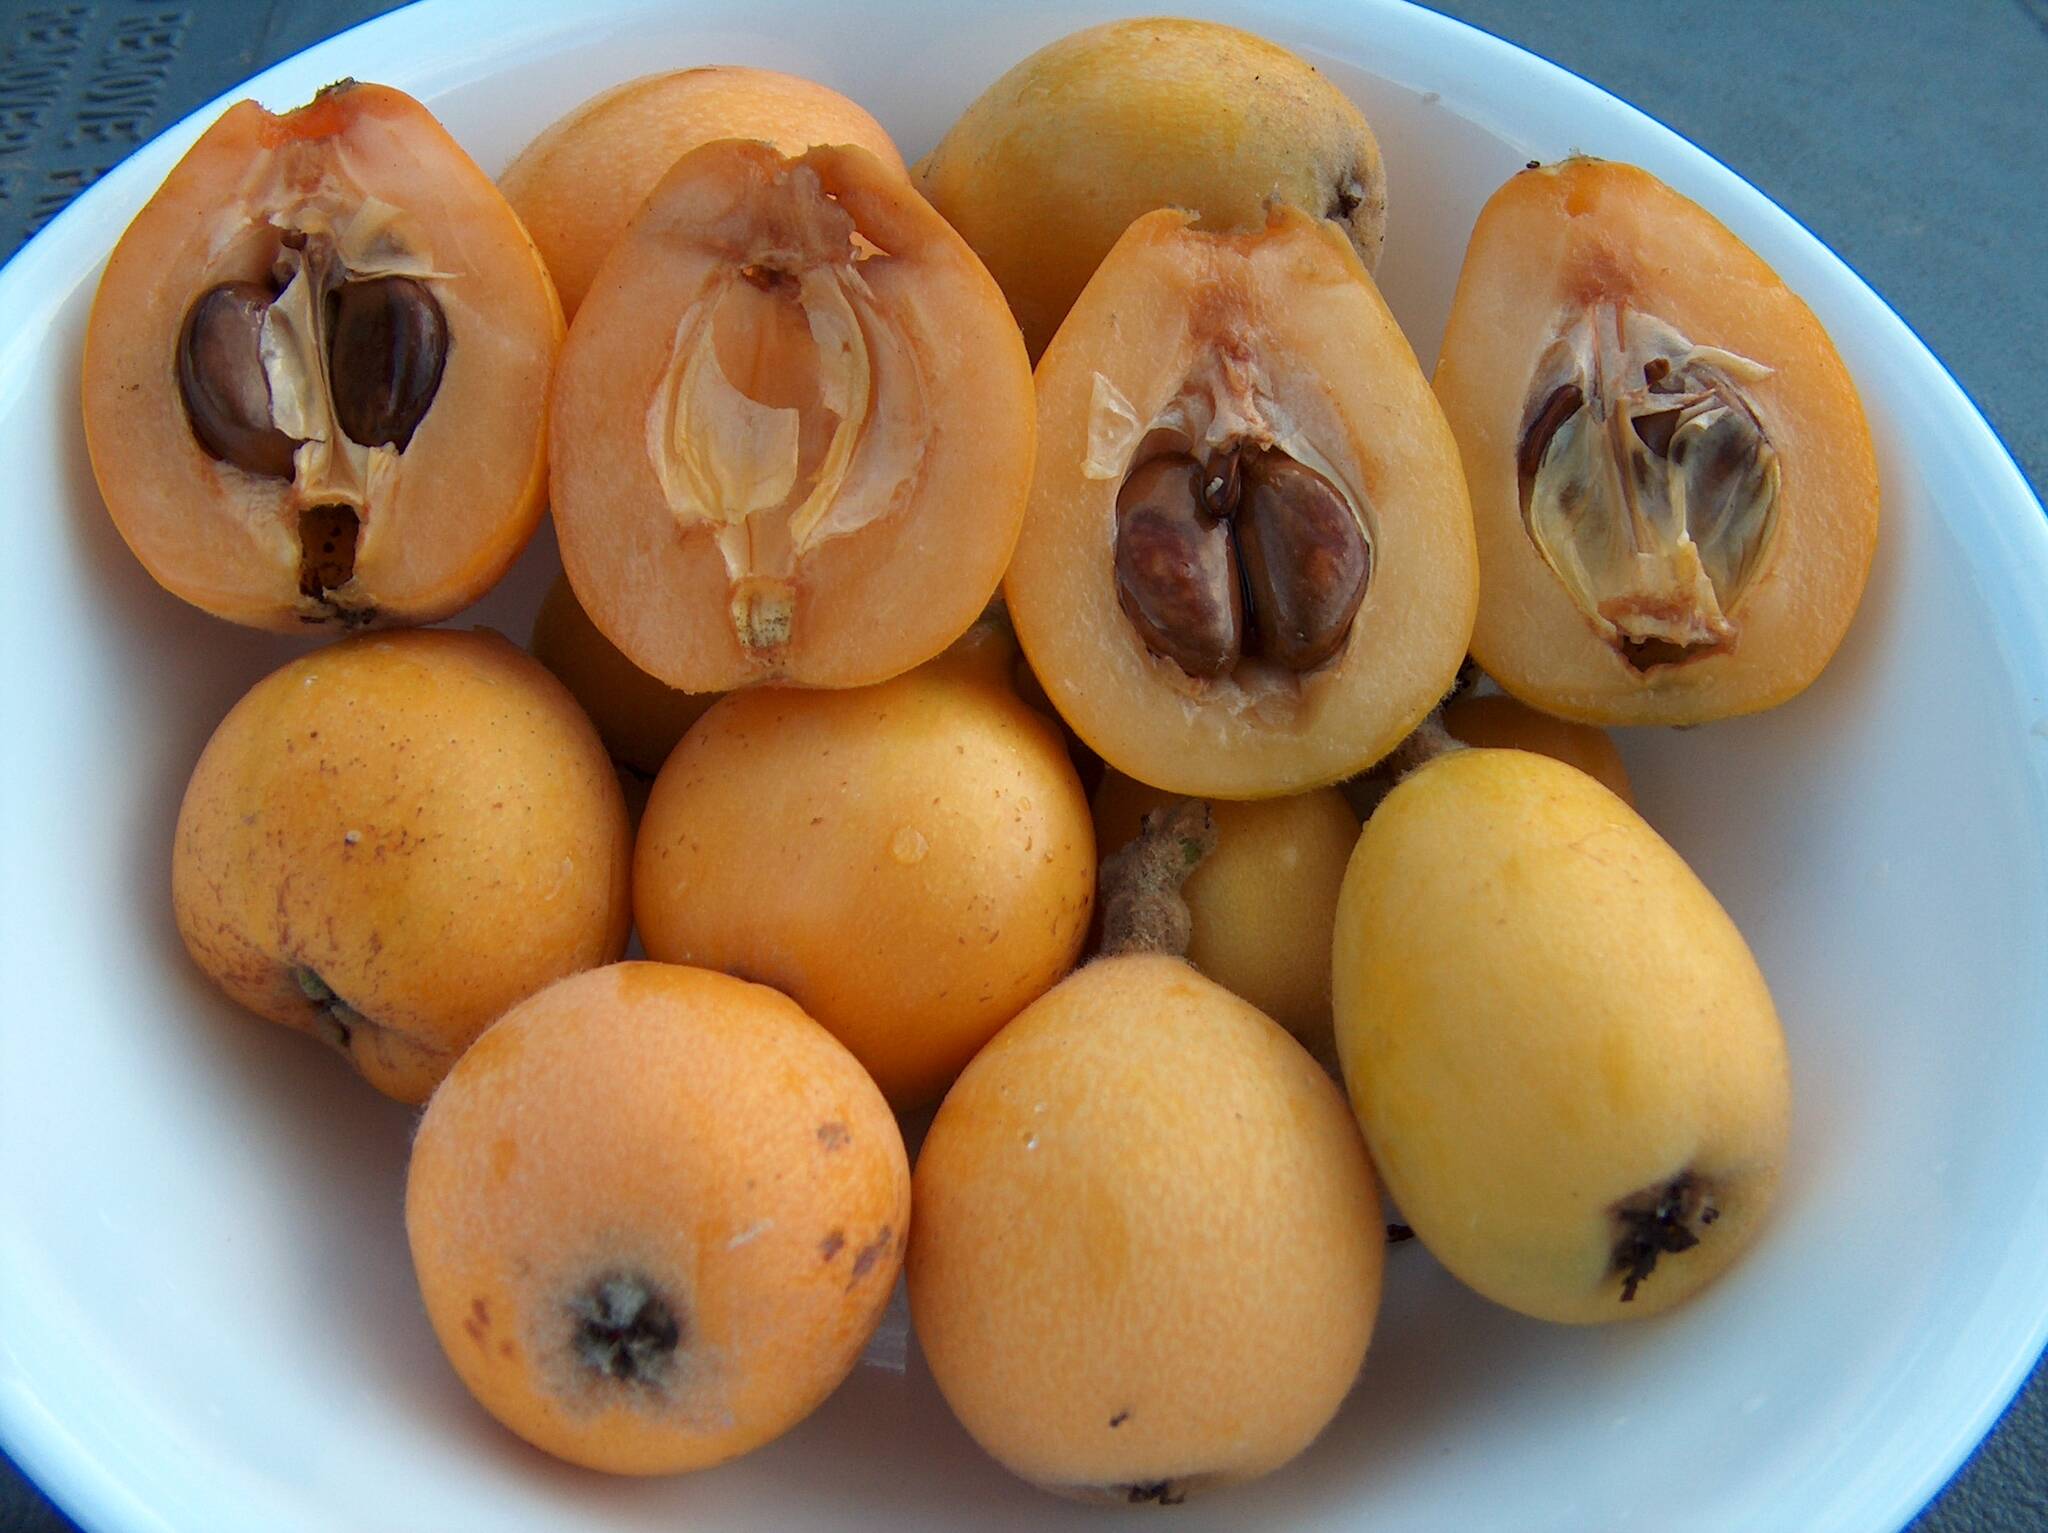 Loquat trees that flower in autumn or early winter and produce ripened fruit from early spring to early summer can be grown locally. Learn more, Thursday, October 14th from noon to 1 p.m. by attending Tom Del Hotal’s Zoom presentation. Submitted photo